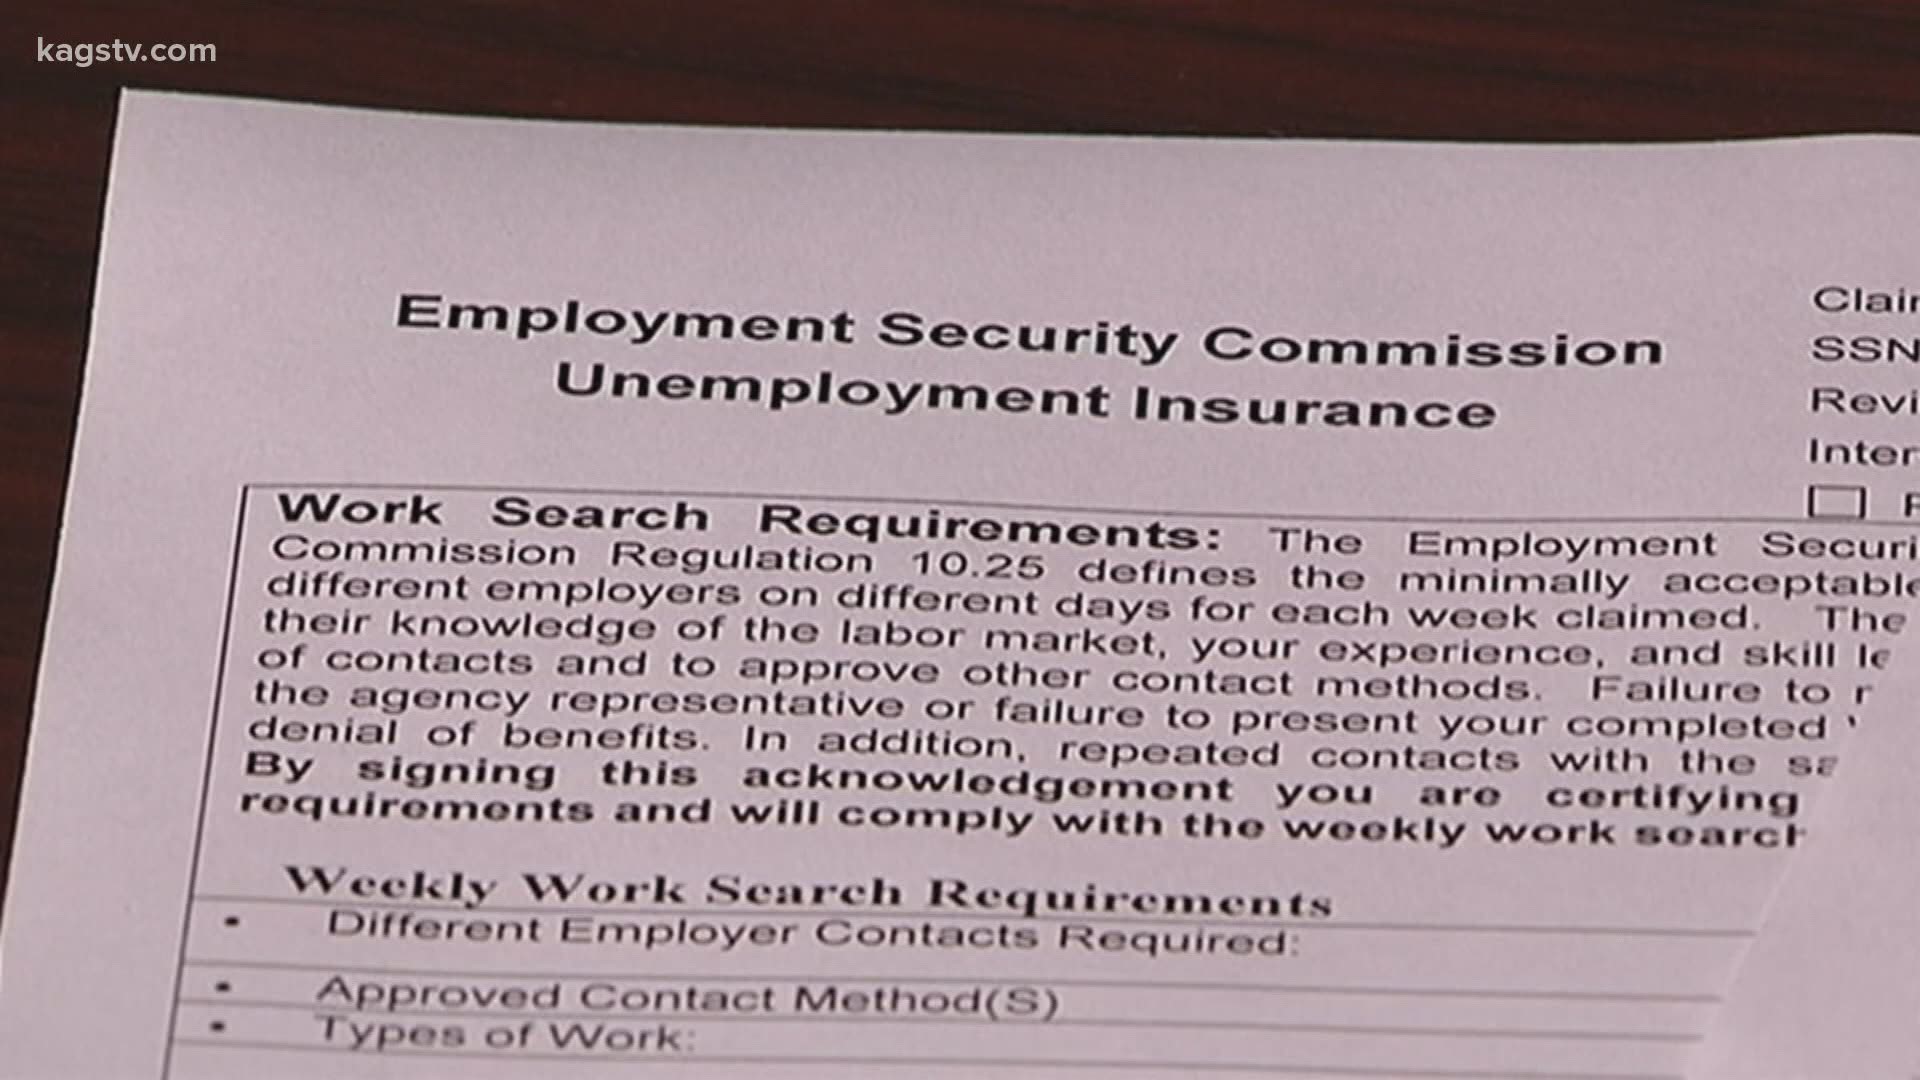 Unemployment benefits are ending; what&#39;s next? | www.semadata.org